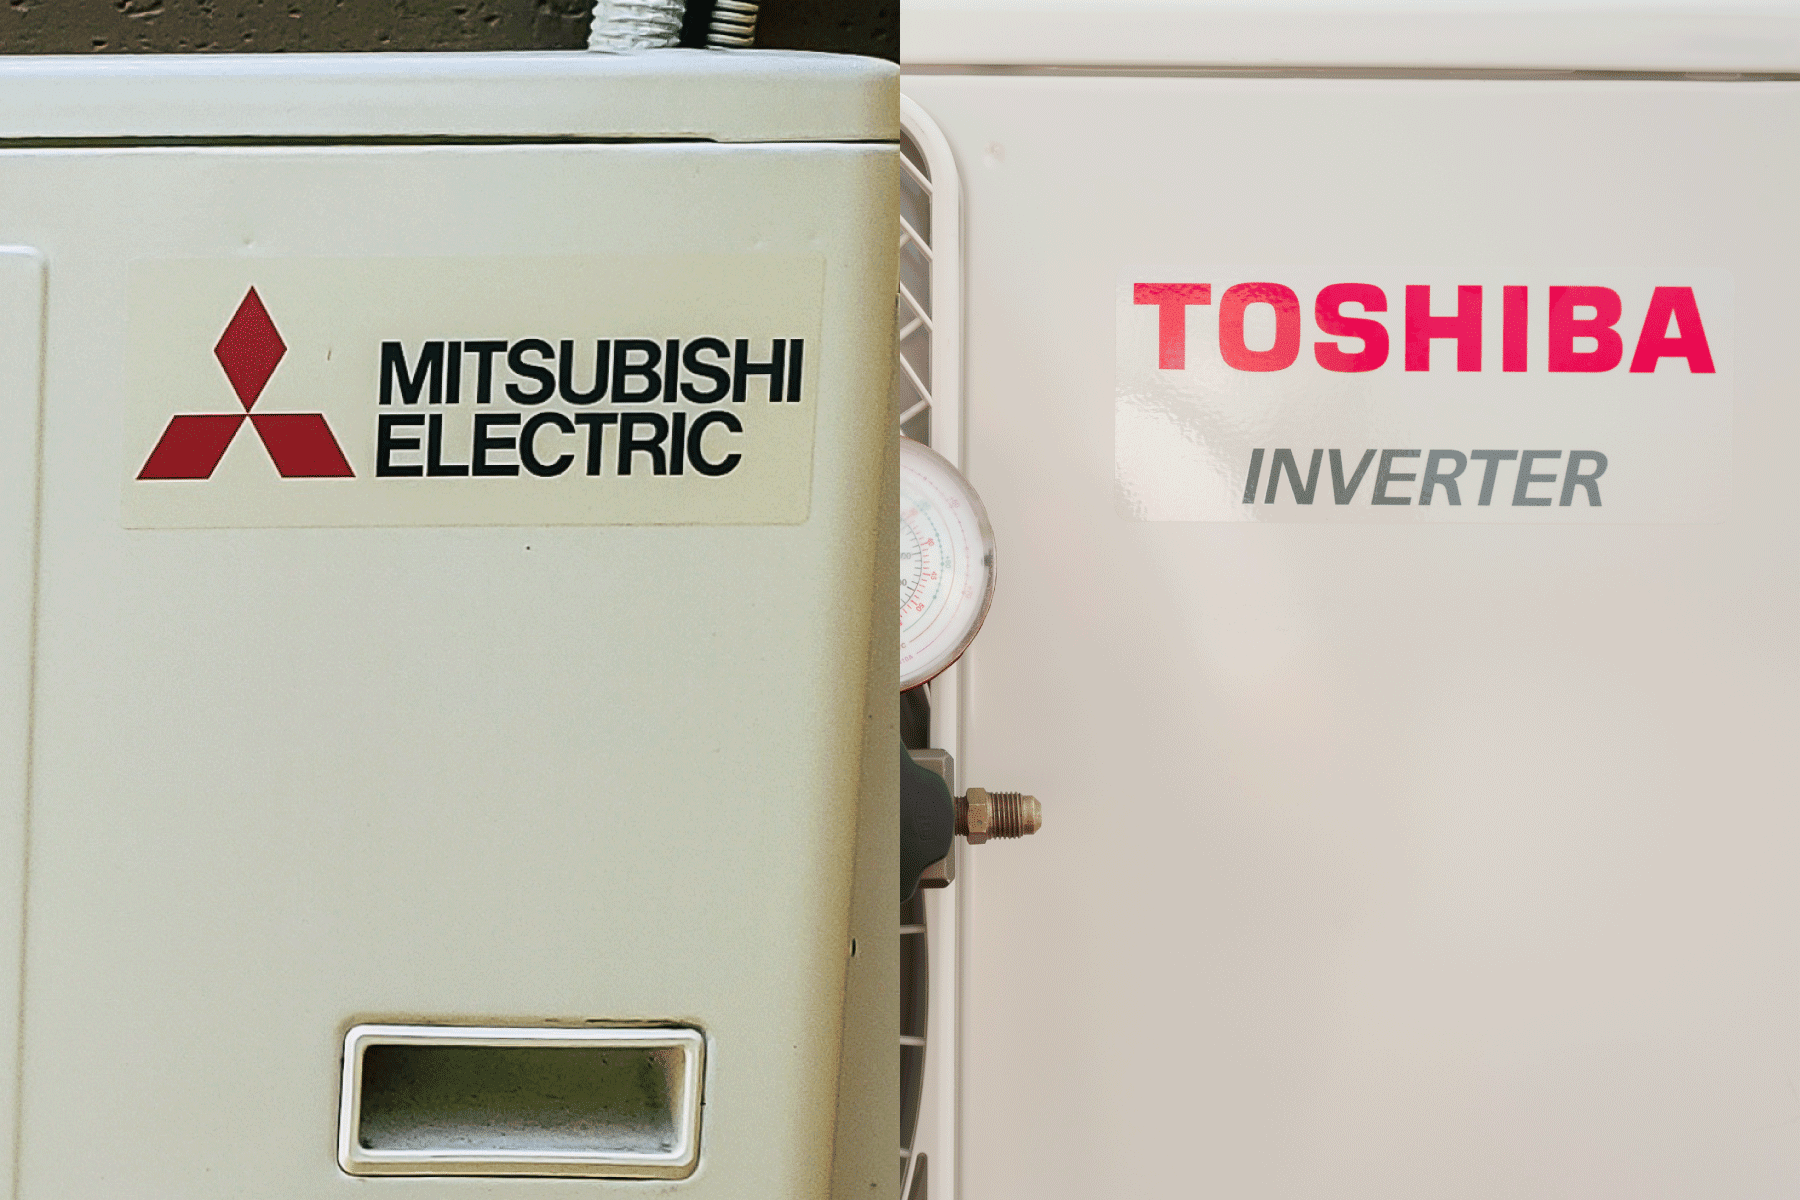 Collaged photo of Mitsubishi and Toshiba air conditioning units